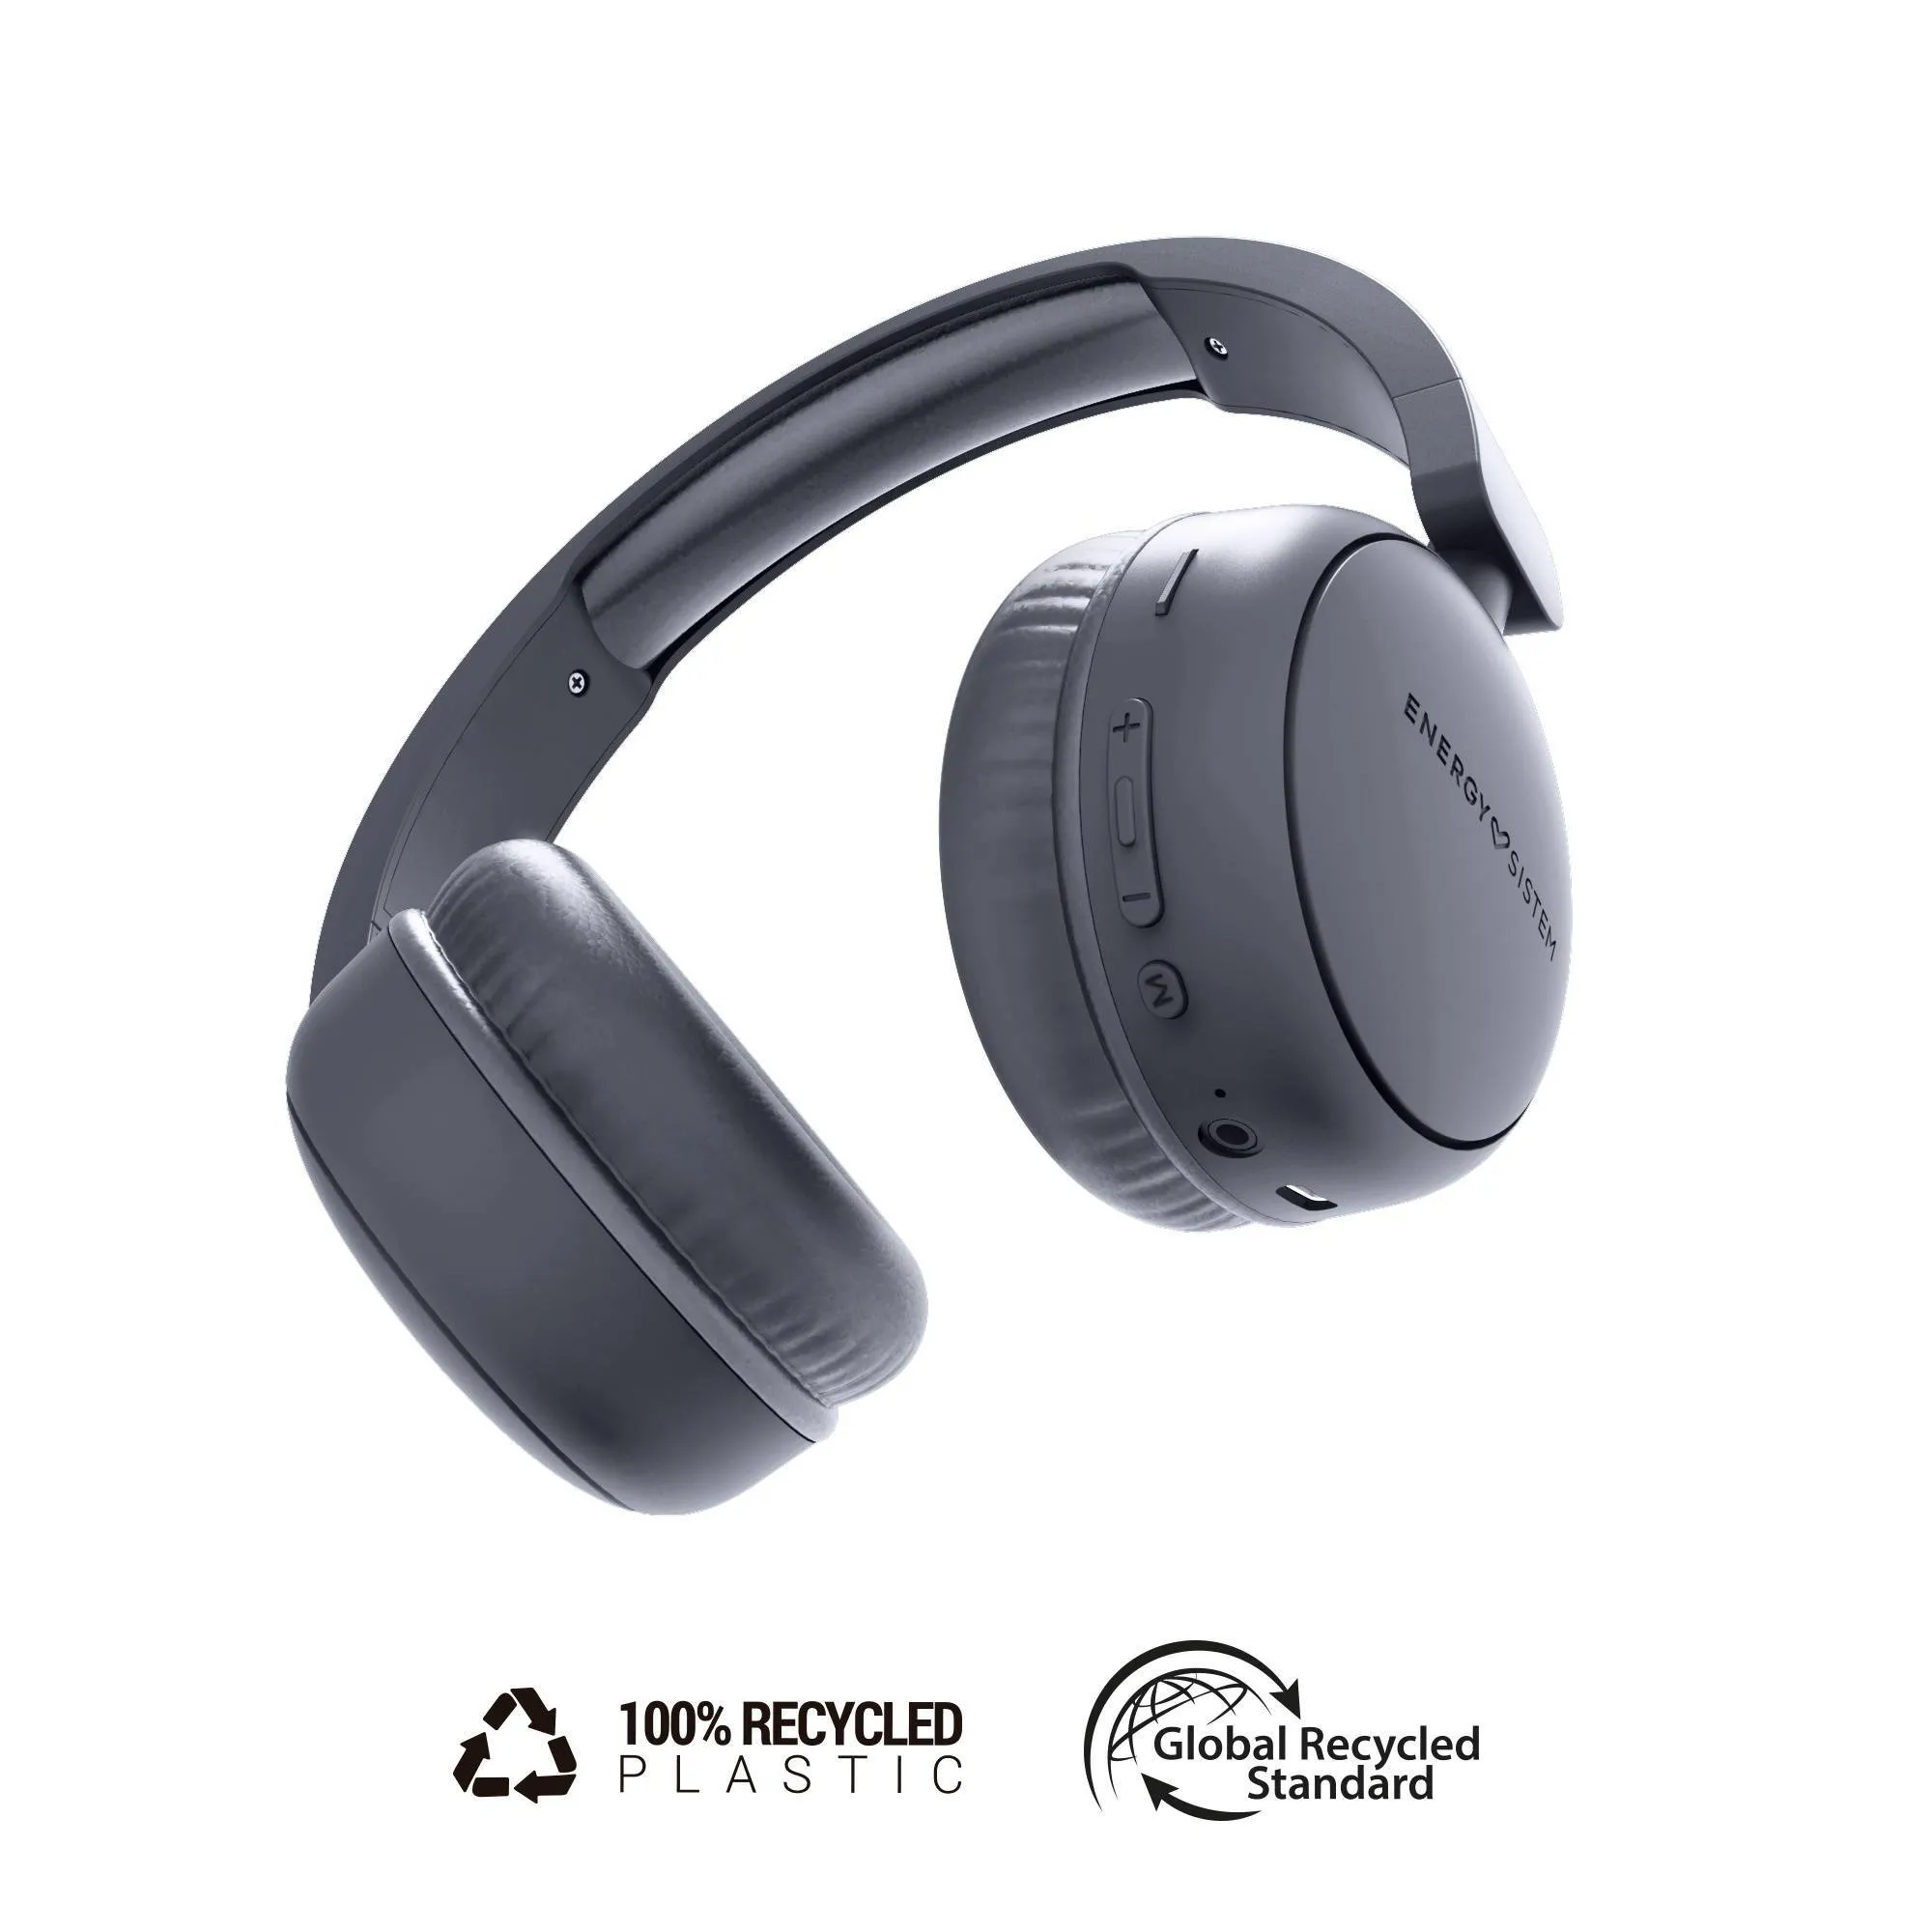 HeadTuner Bluetooth headphones made from recycled plastic, with built-in FM radio and Micro SD slo